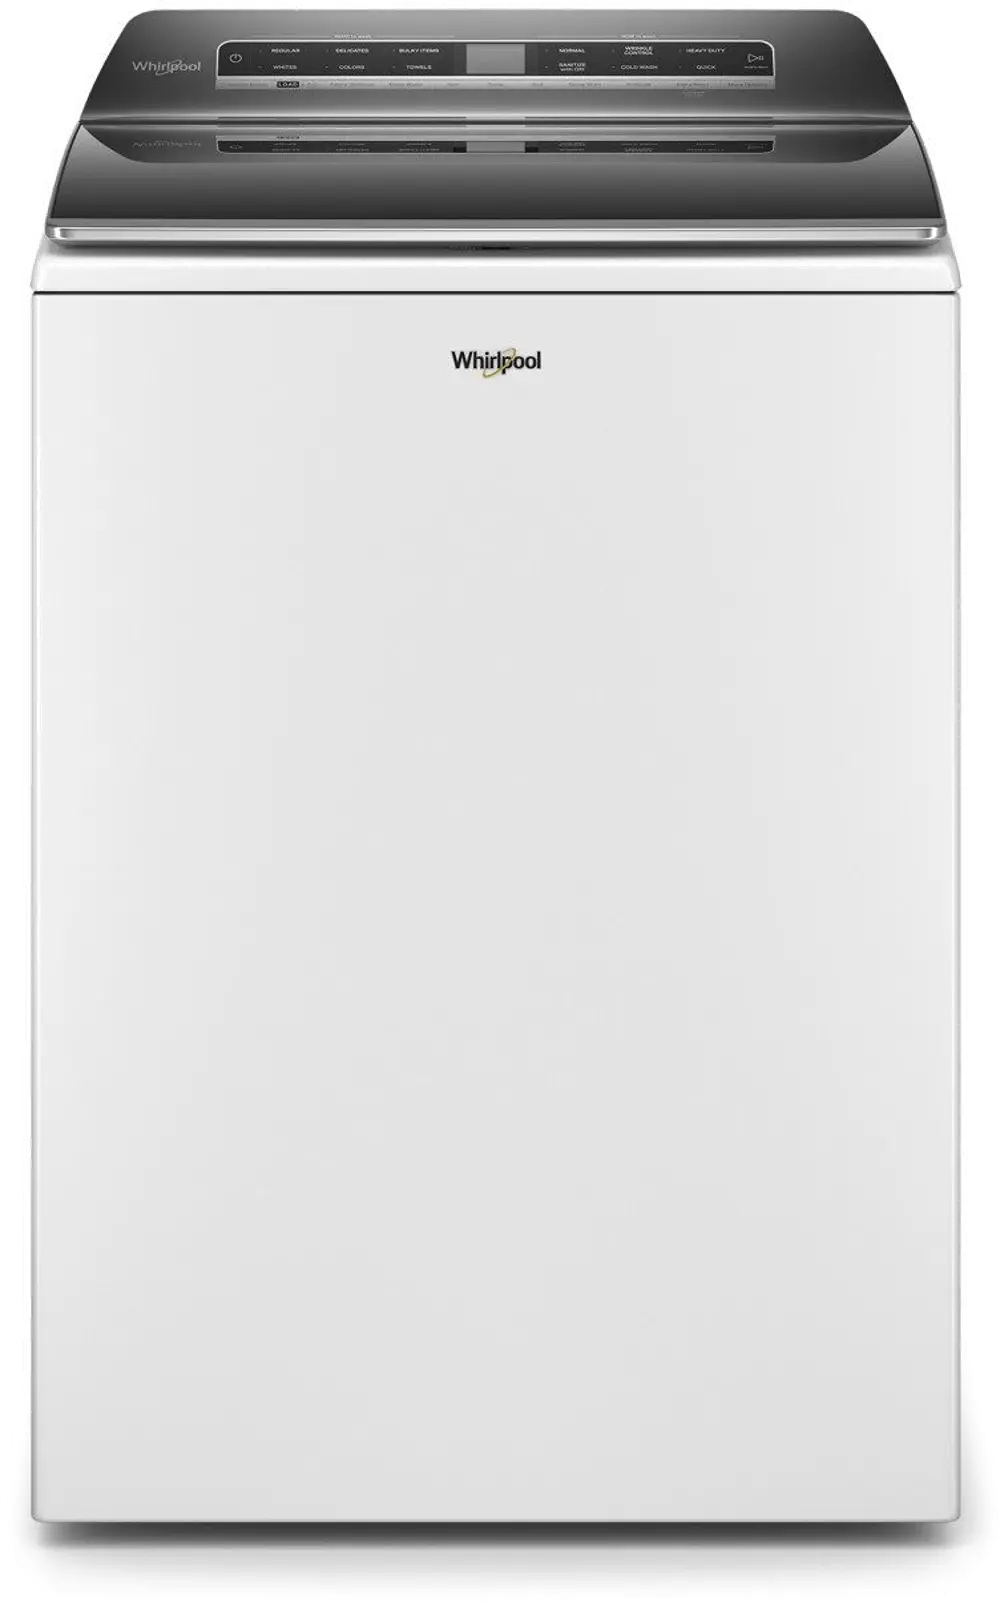 WTW8127LW Whirlpool 5.3 cu ft Top Load Washer with Removable Impeller - White W6605-1